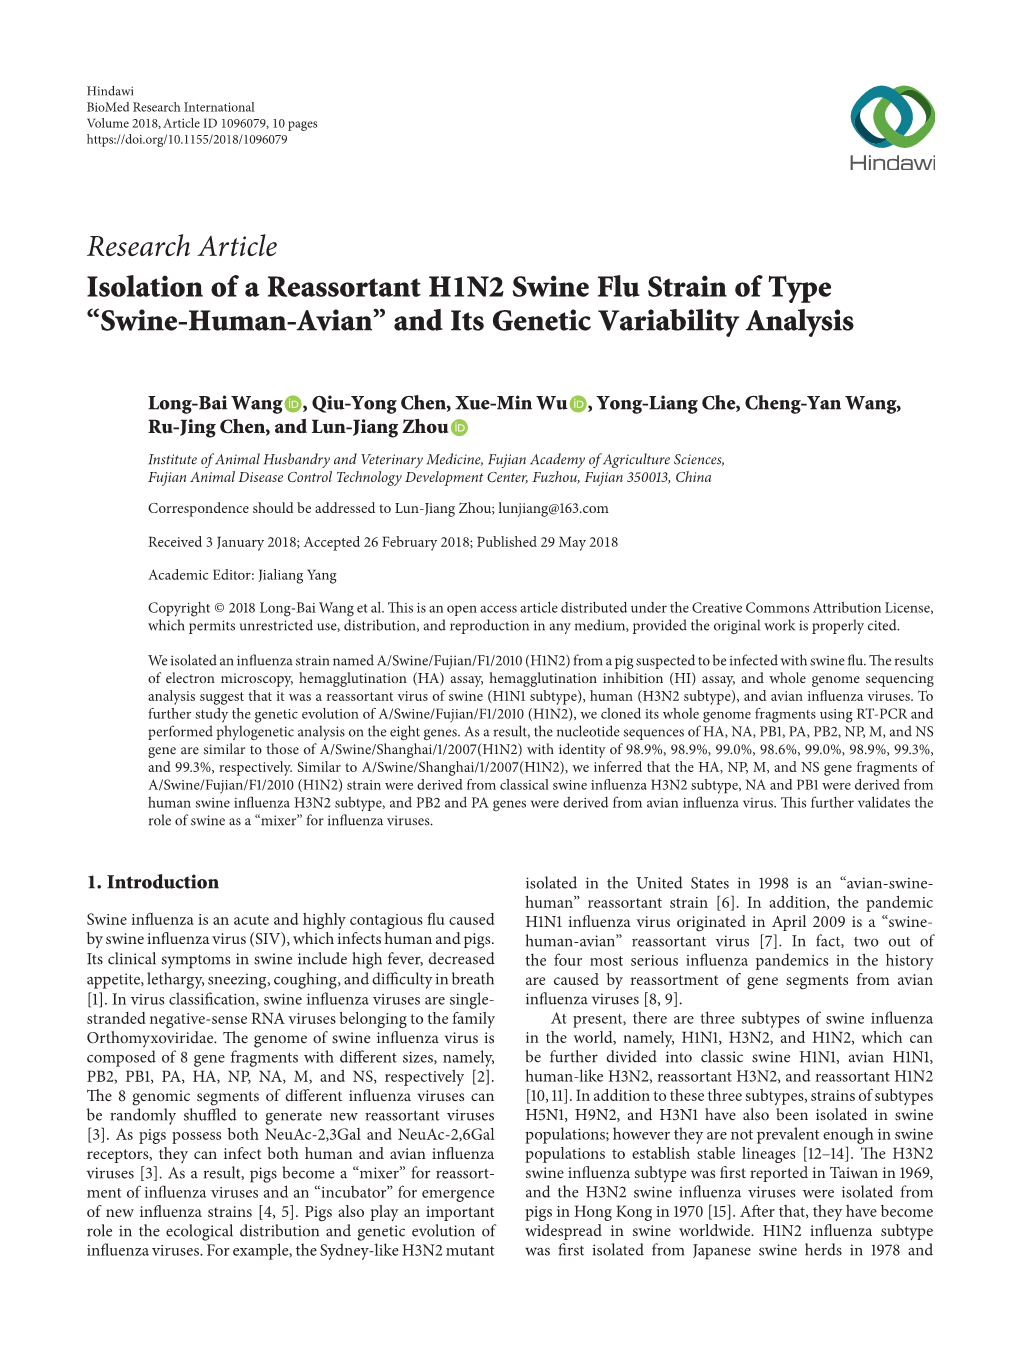 Research Article Isolation of a Reassortant H1N2 Swine Flu Strain of Type (Swine-Human-Avian) and Its Genetic Variability Analysis